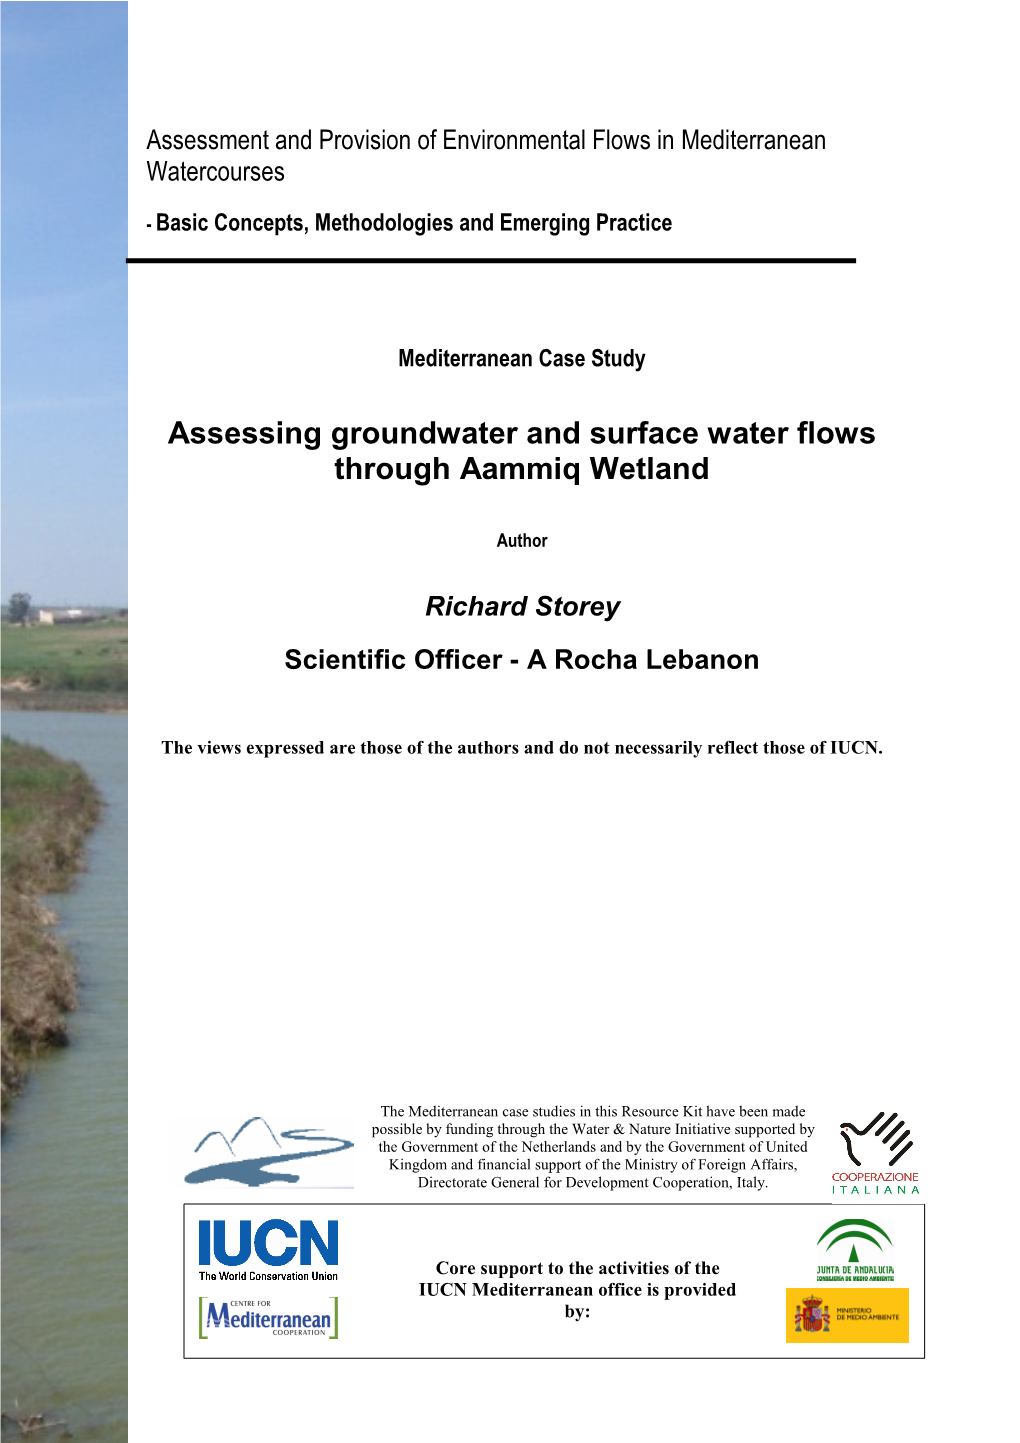 Assessing Groundwater and Surface Water Flows Through Aammiq Wetland